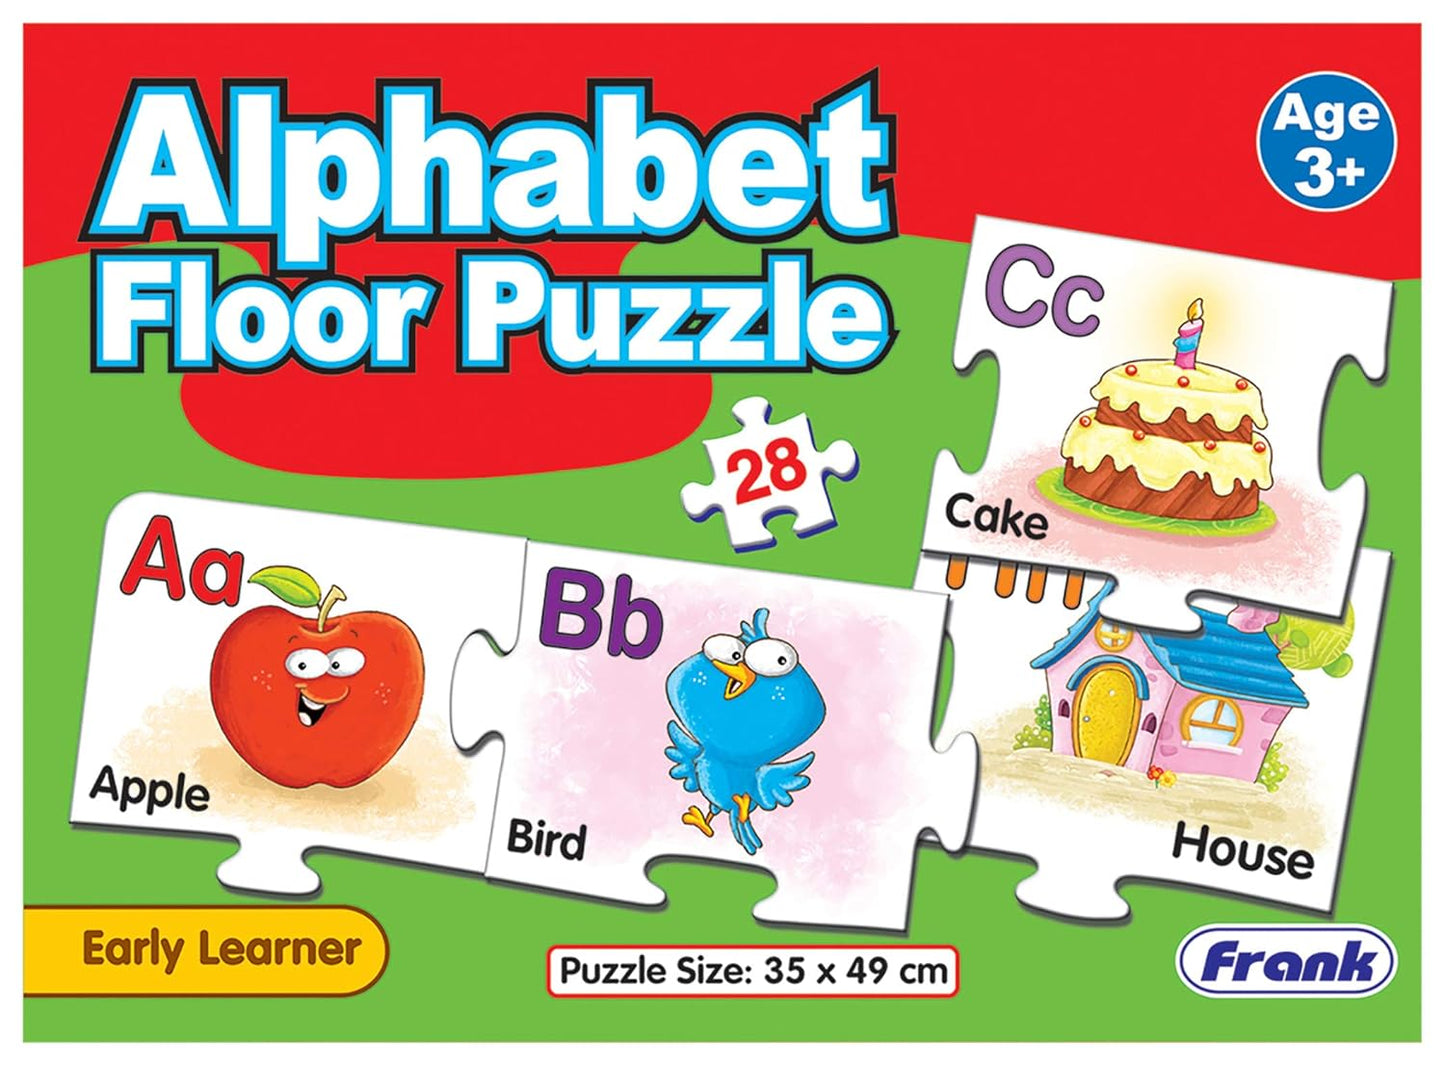 Alphabet A to Z Jumbo Floor Puzzle of 26 pieces for young ones